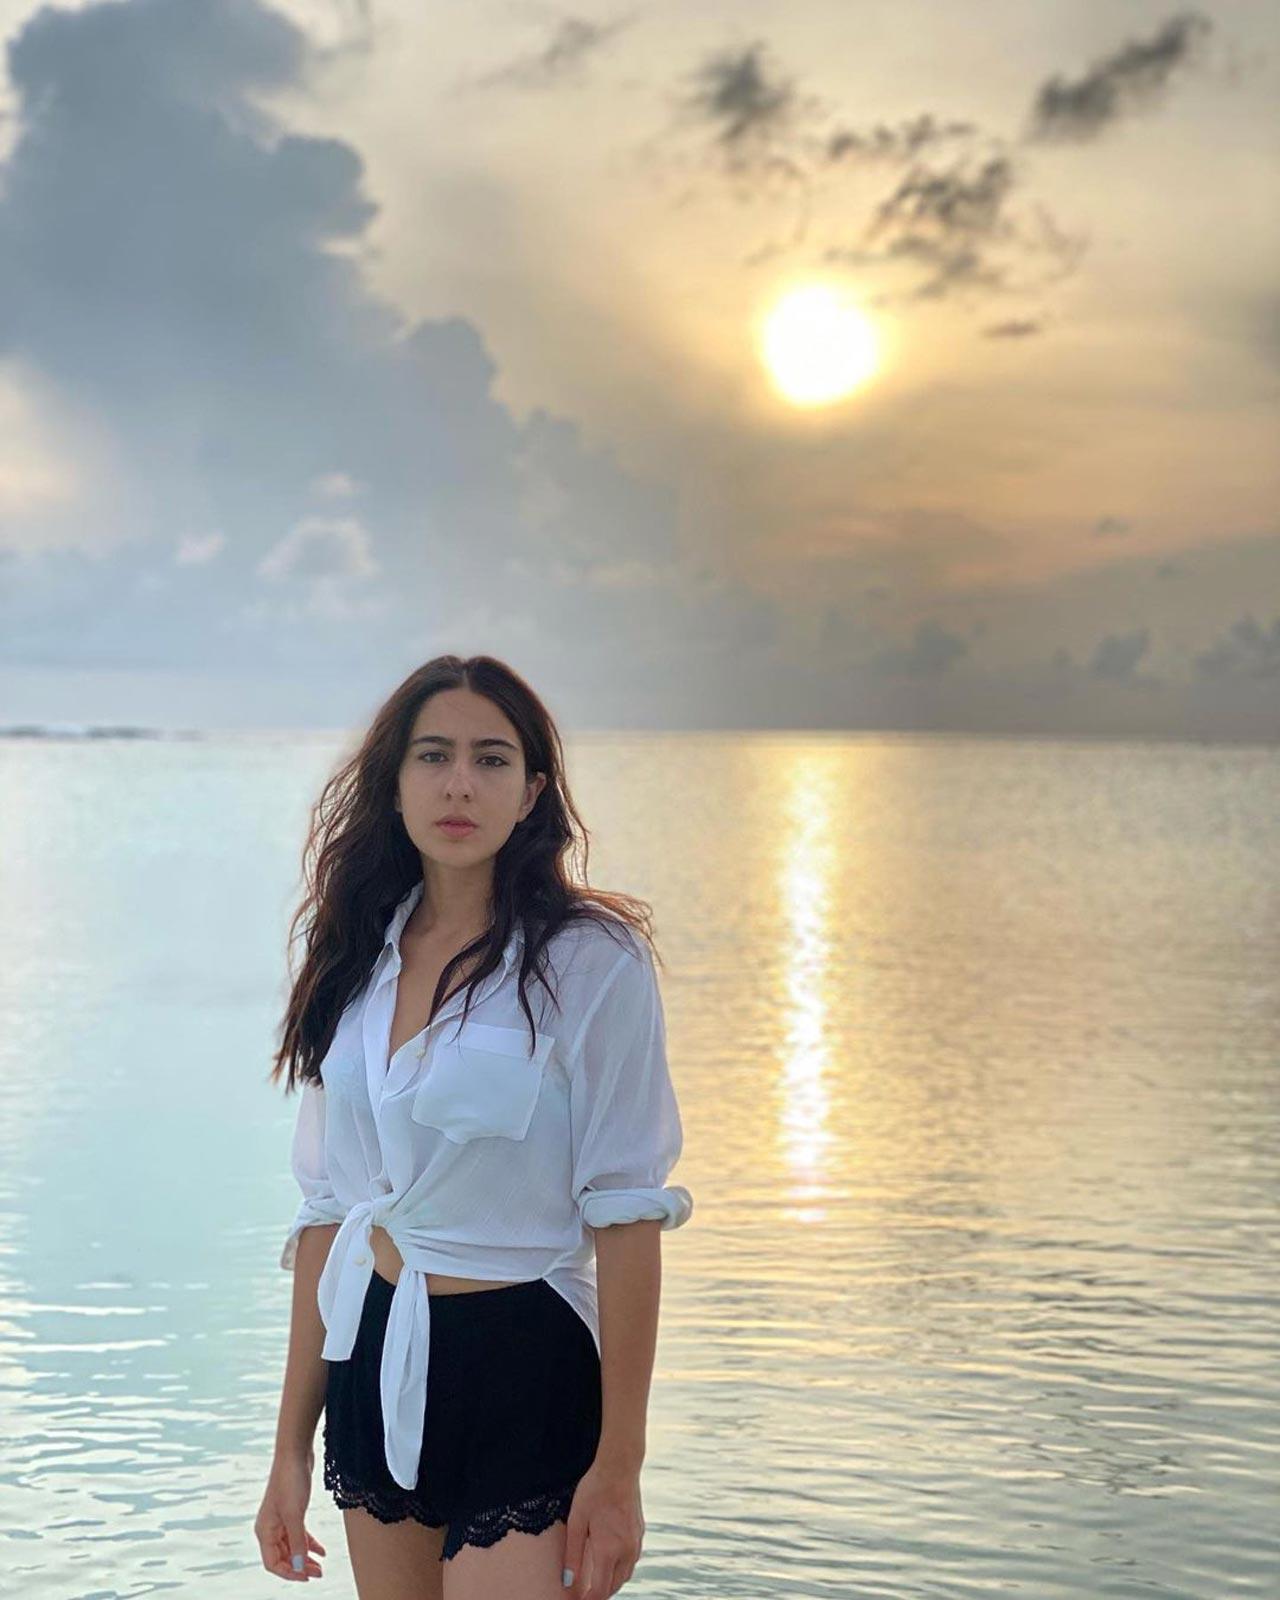 Sara Ali Khan
Sara is the ideal role model for simplicity and natural beauty at its best. Isn't the actress' beach outfit of black shorts and a white top one of the most popular beach looks today? It's totally doable by girls and women alike and we're taking notes on her looks, for sure!